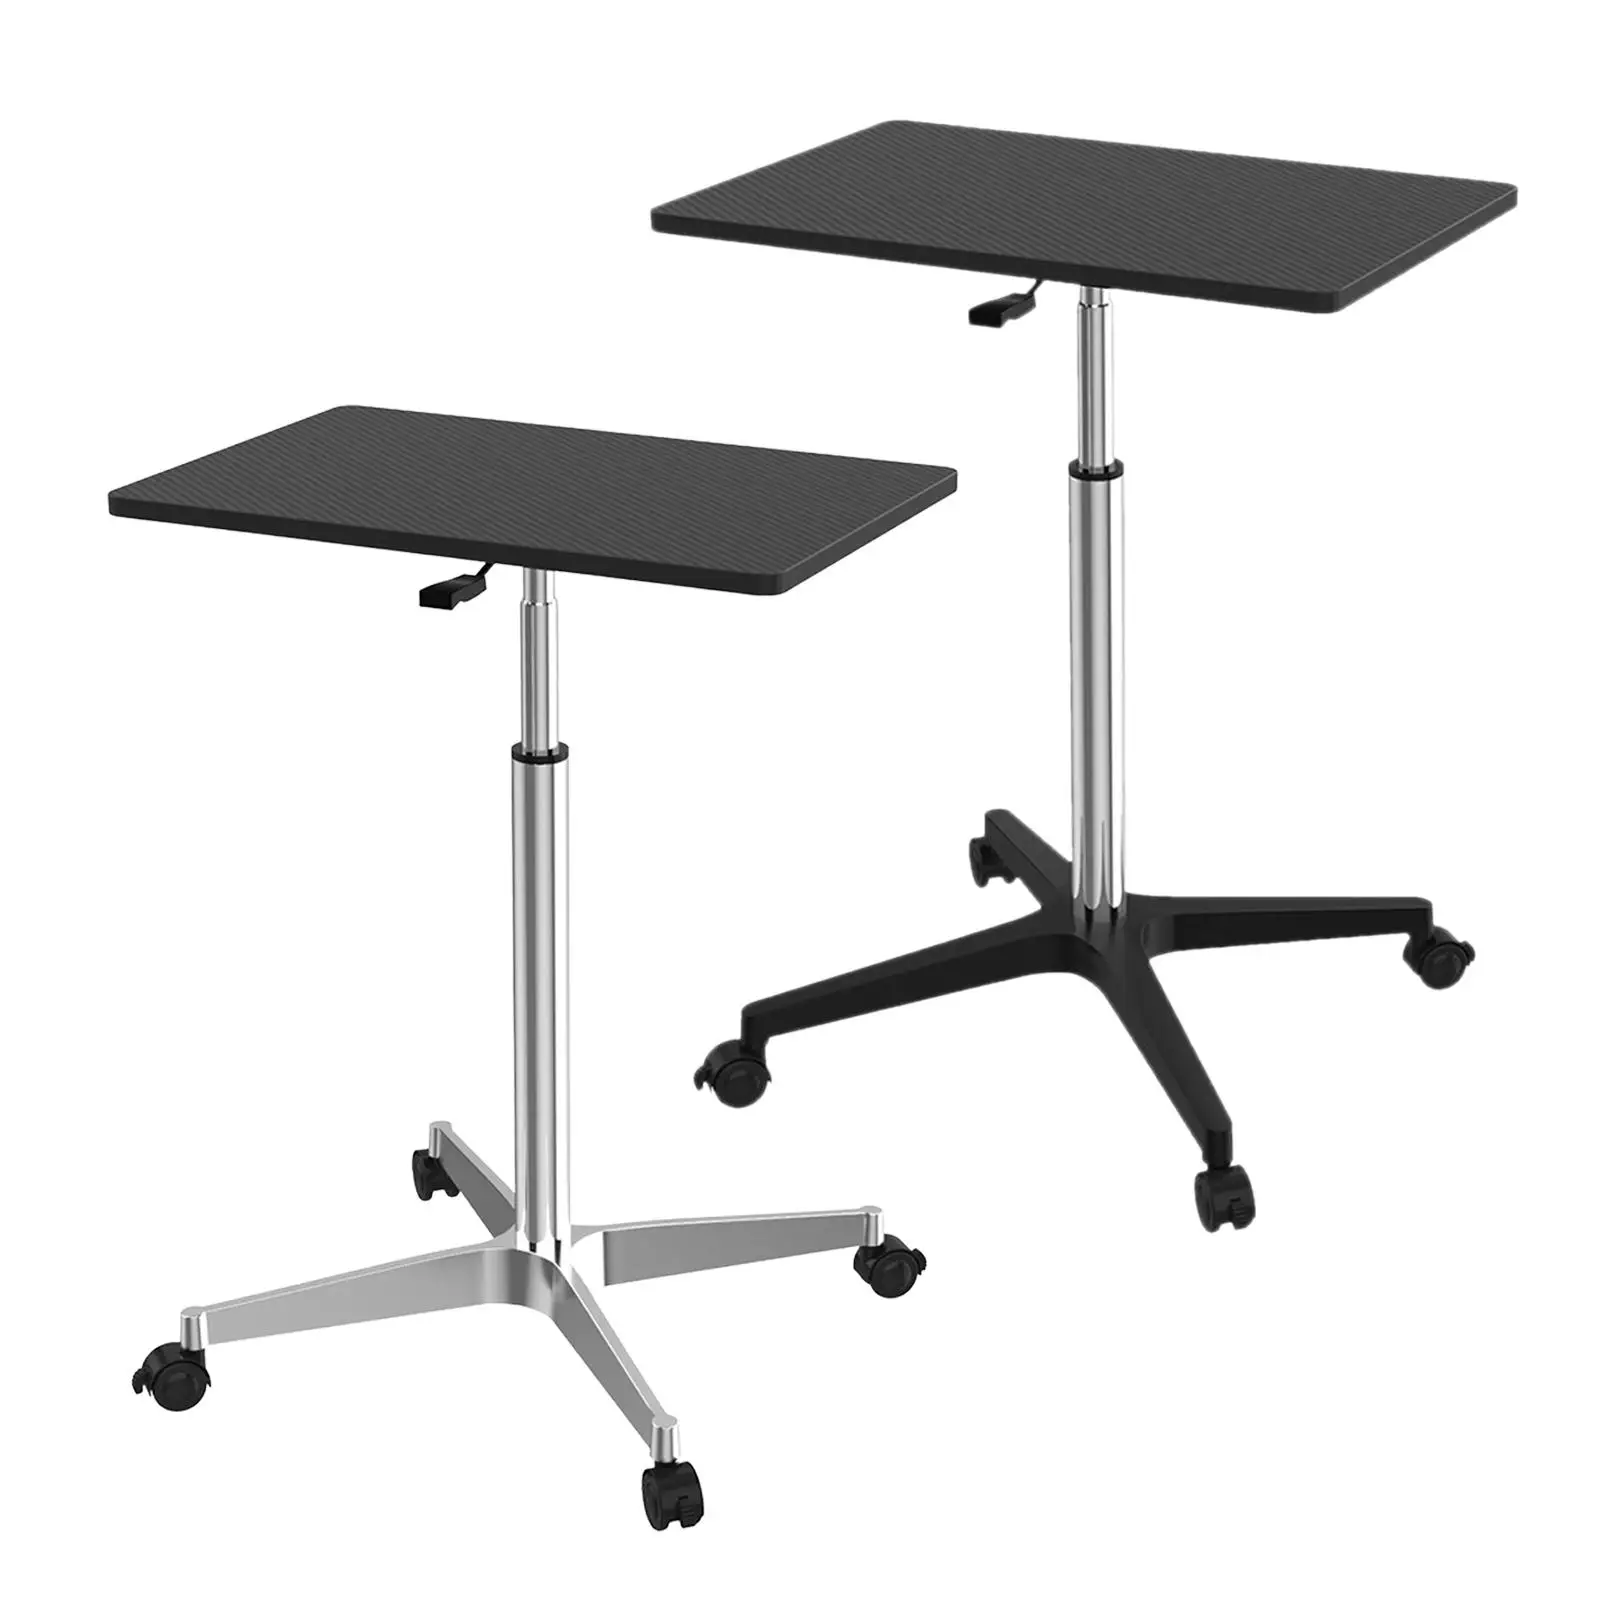 Adjustable Rolling Desk Laptop Standing Table Cart with Lockable Wheels Multifunctional Durable Tabletop 60Cmx39cm Portable